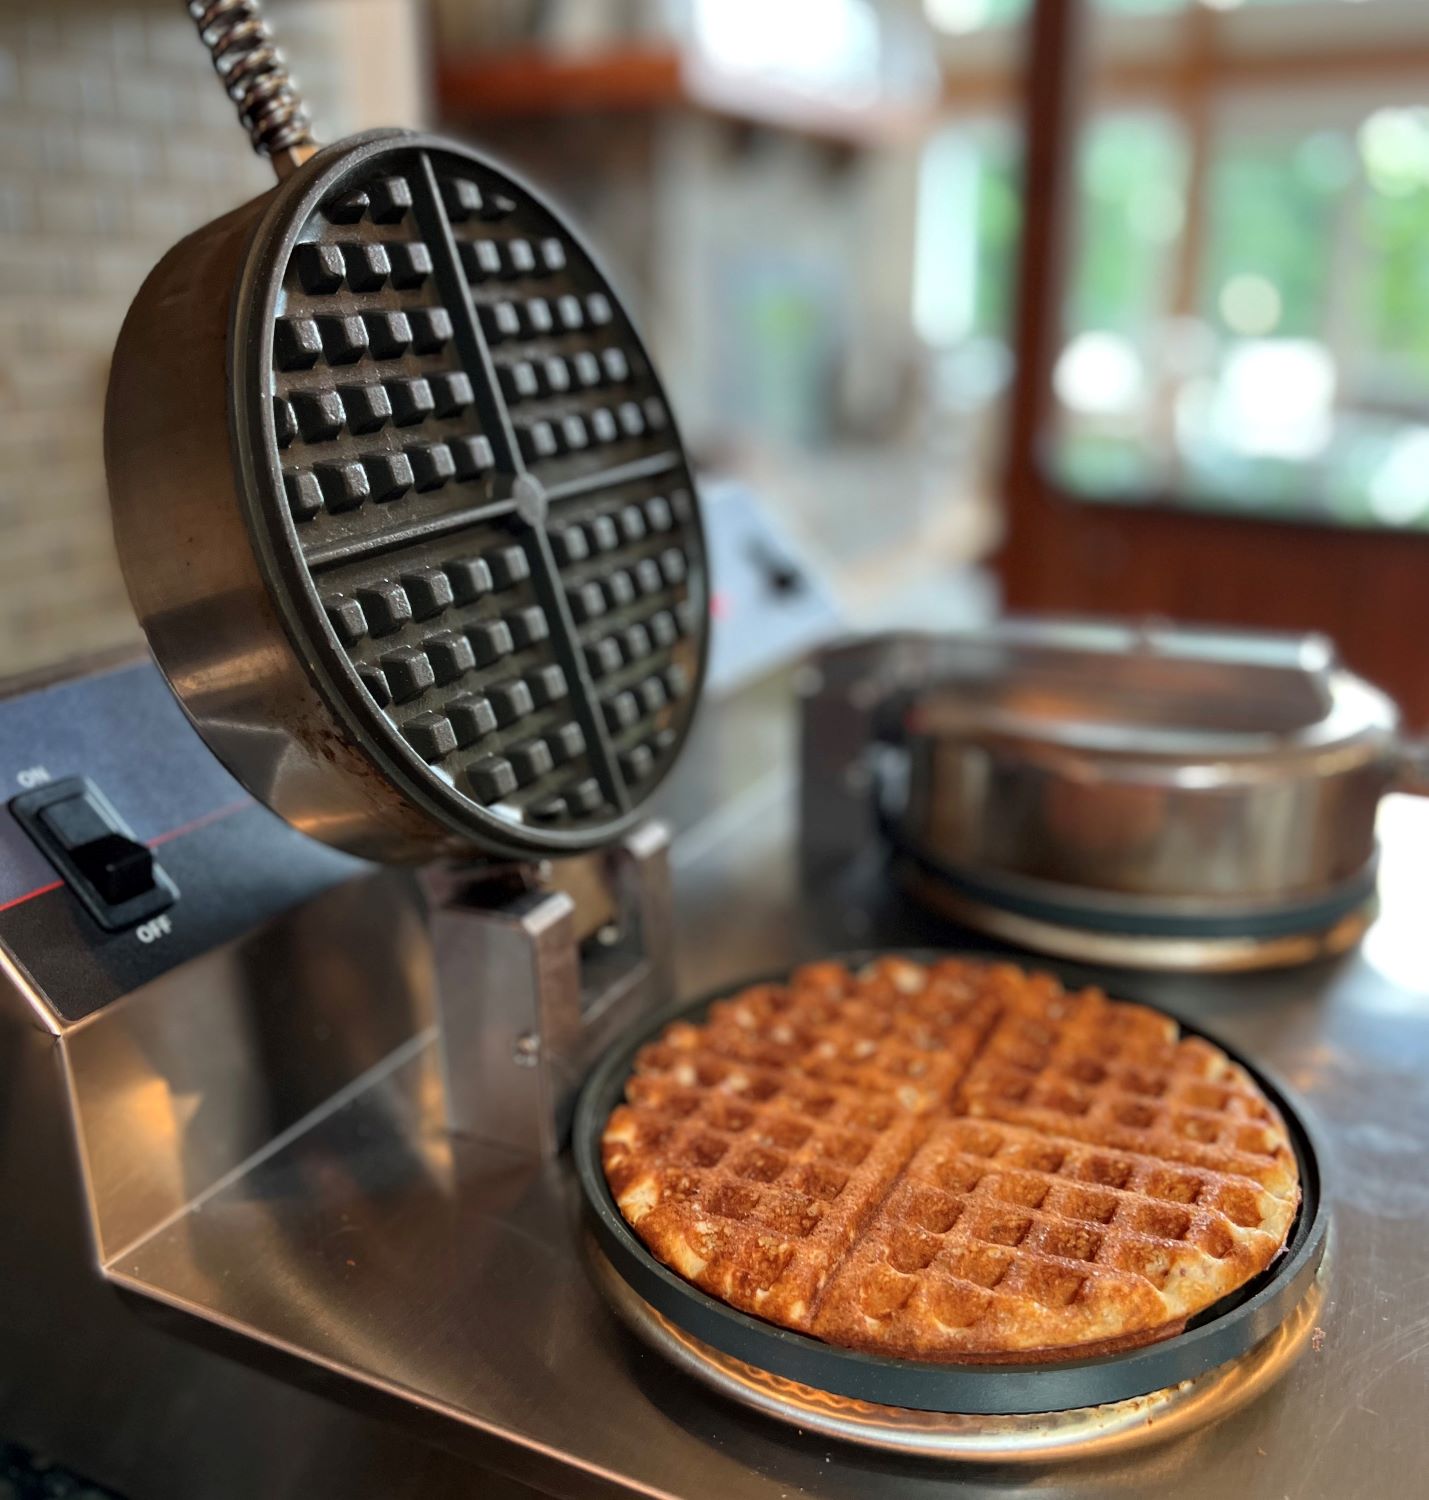 waffles breakfast homemade fresh family recipe healthy sweet savory brunch lunch dinner maple syrup